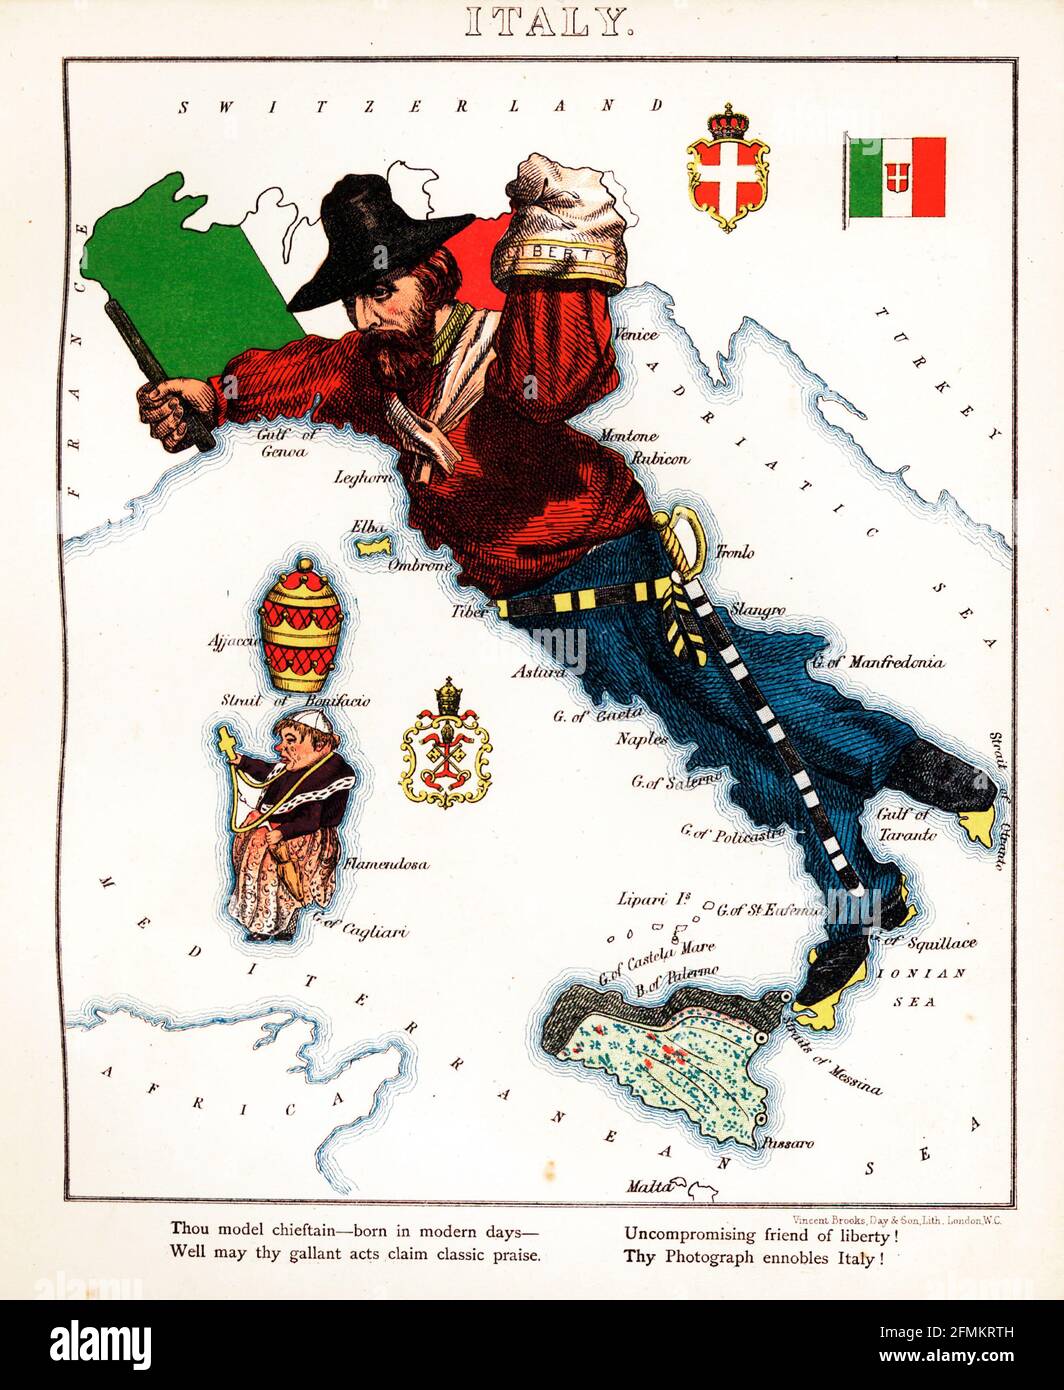 Italy – geographical fun. Illustrated satirical / cartographic map. Published in London by the firm of Hodder and Stoughton in 1869. Stock Photo